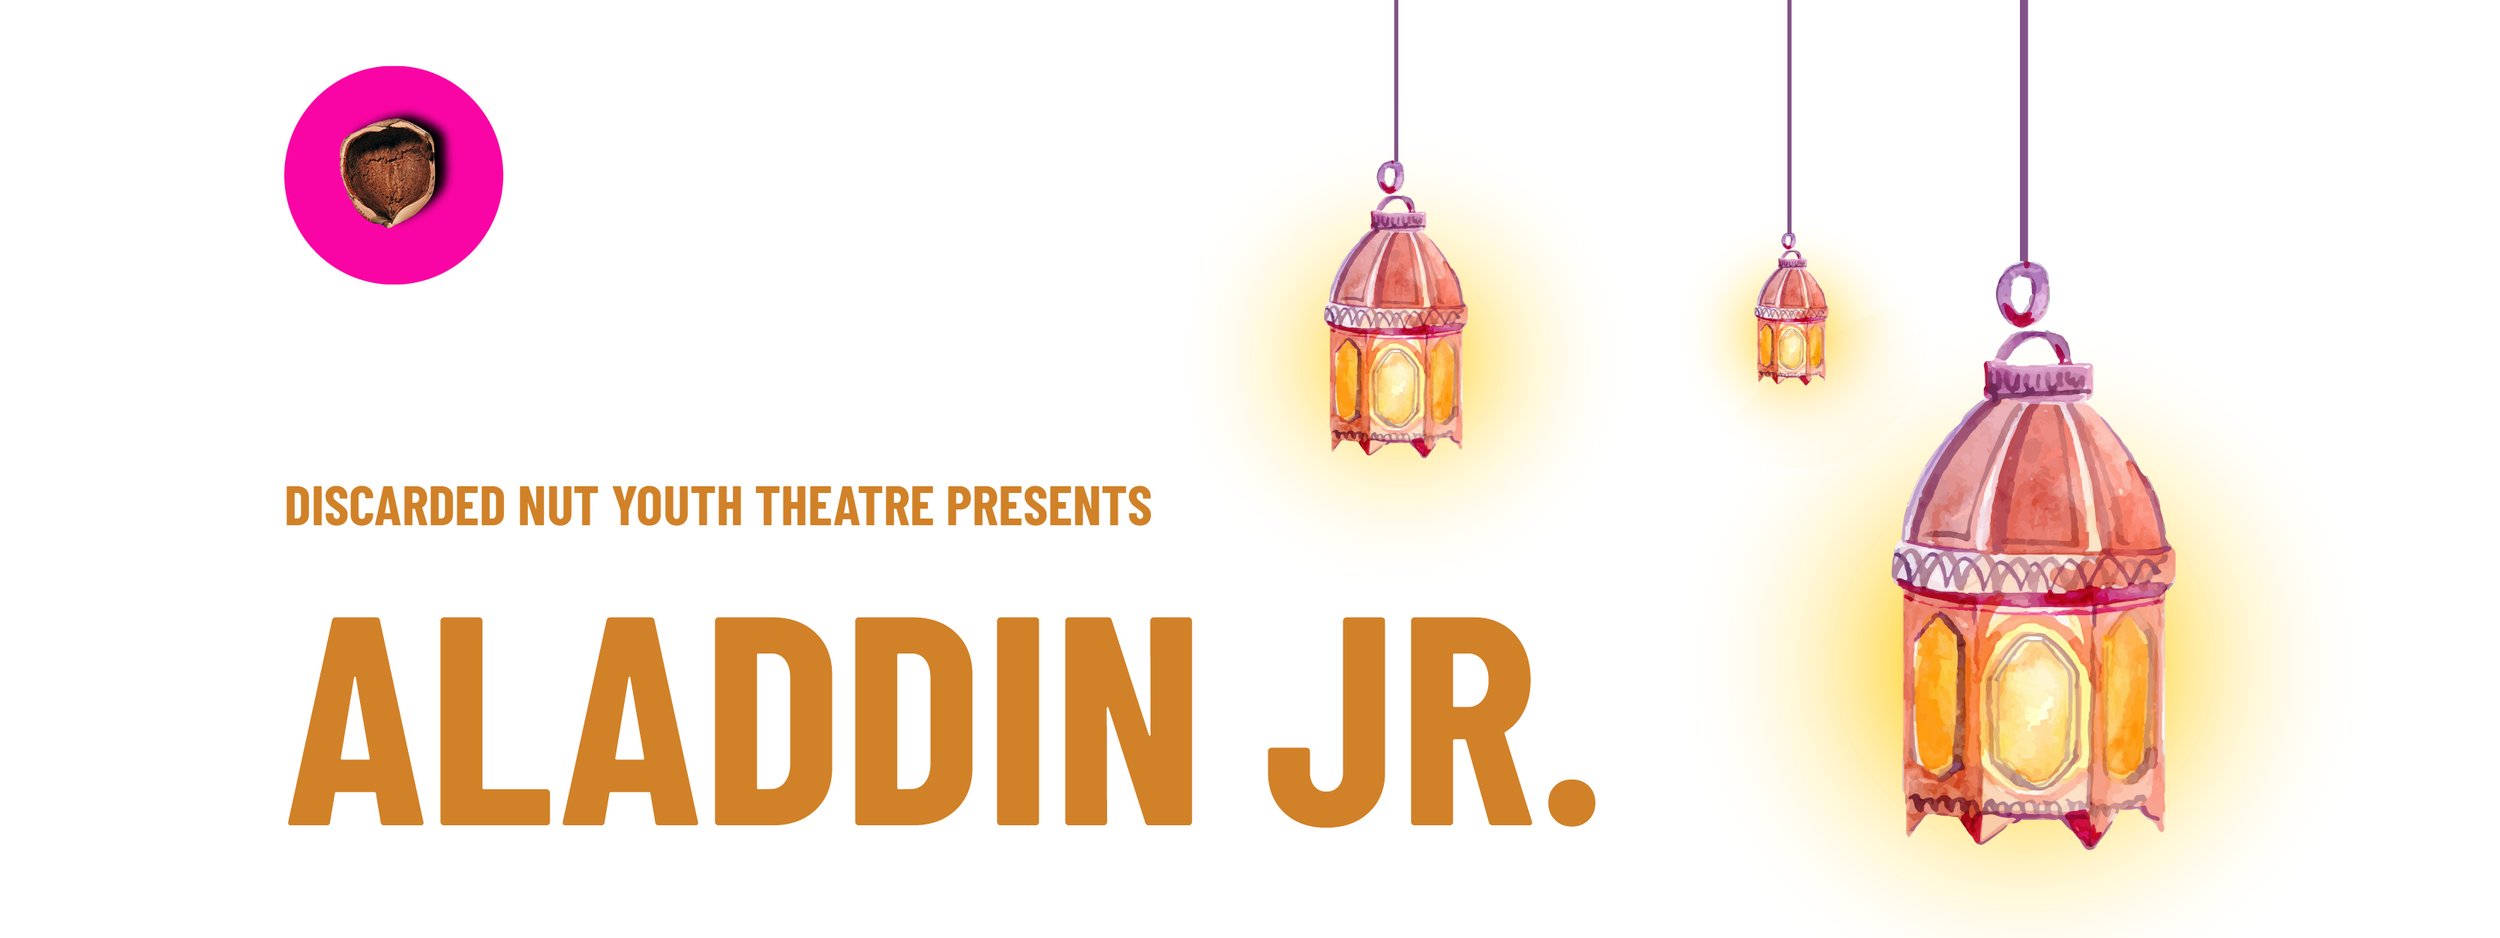 Discarded Nut Youth Theatre presents Aladdin Jr.